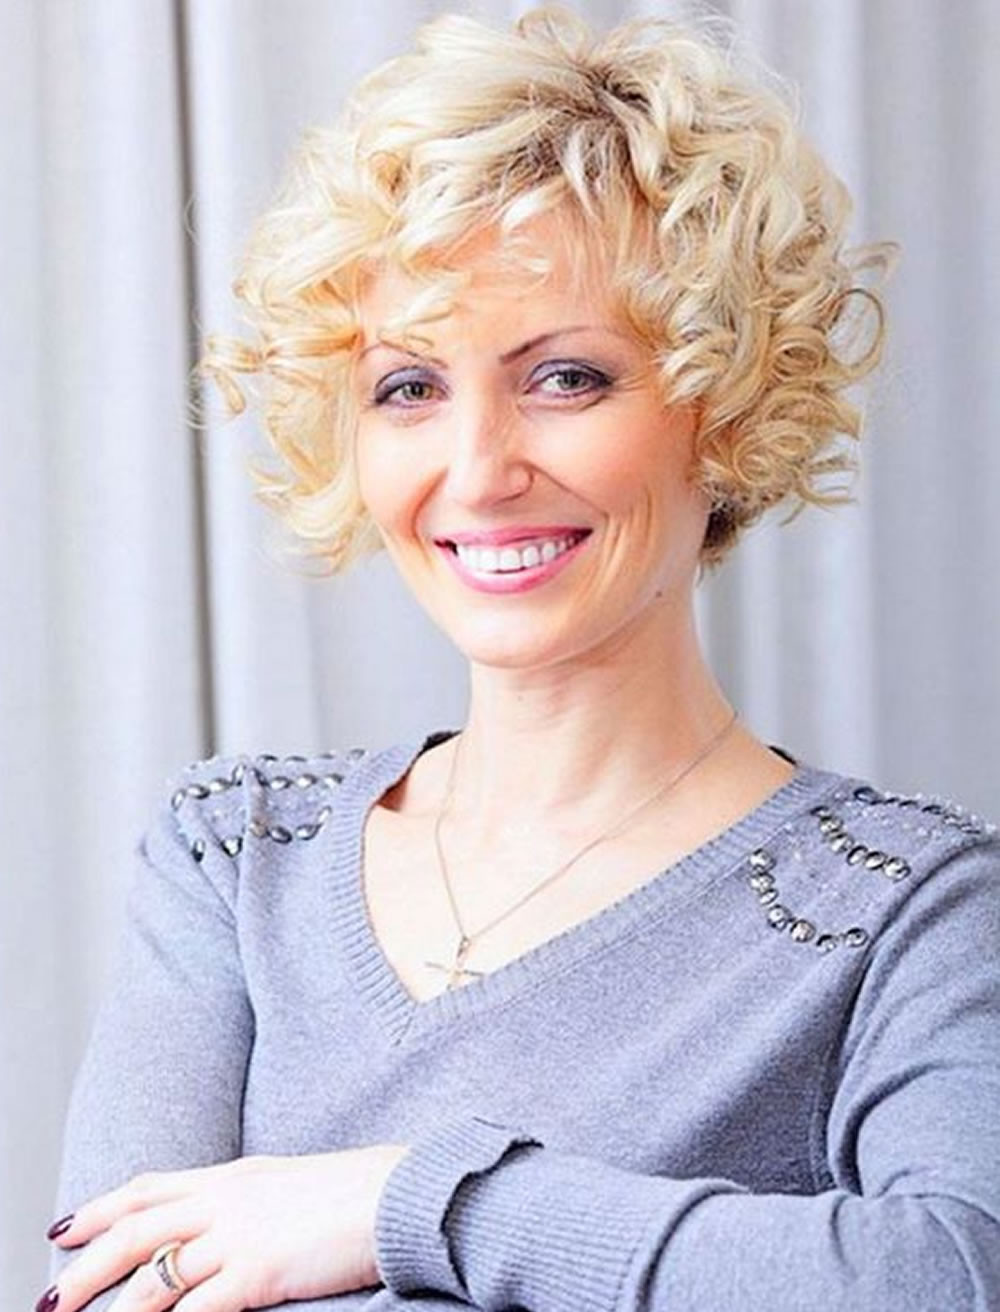 Best Short Haircuts For Older Women
 Curly Short Hairstyles for Older Women Over 50 – Best